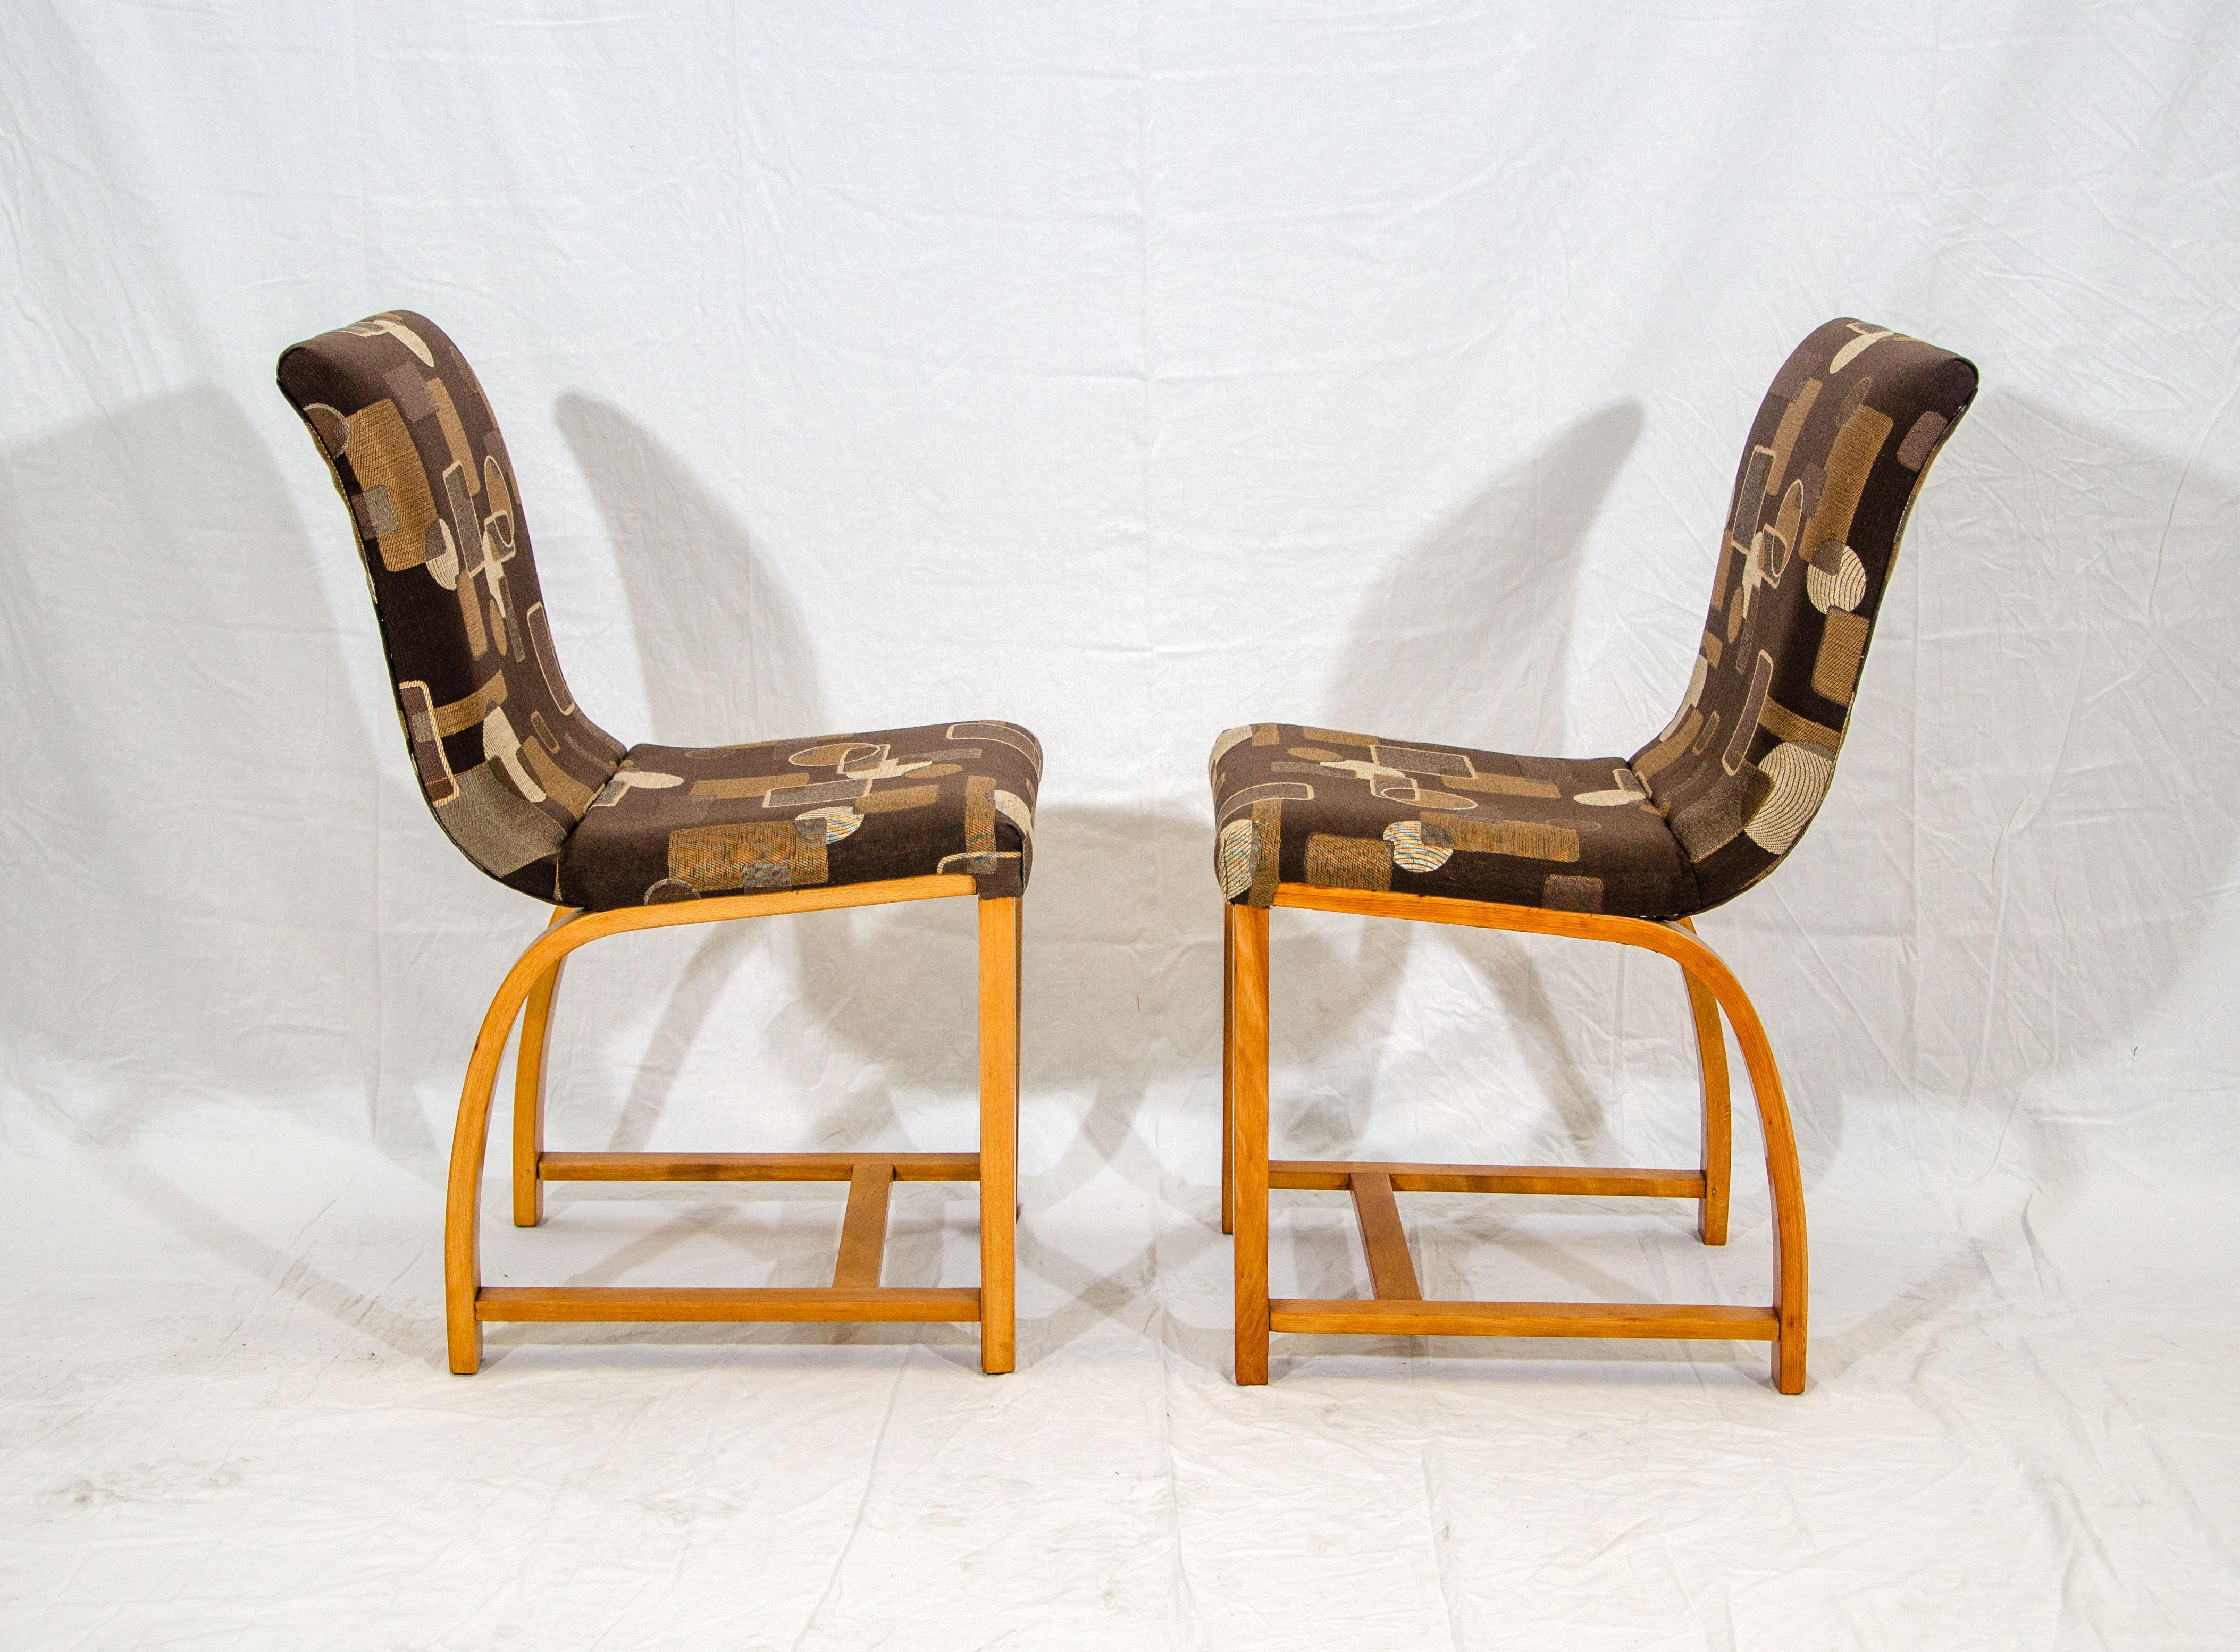 20th Century Set of Four Dining Chairs, Gilbert Rohde for Heywood Wakefield